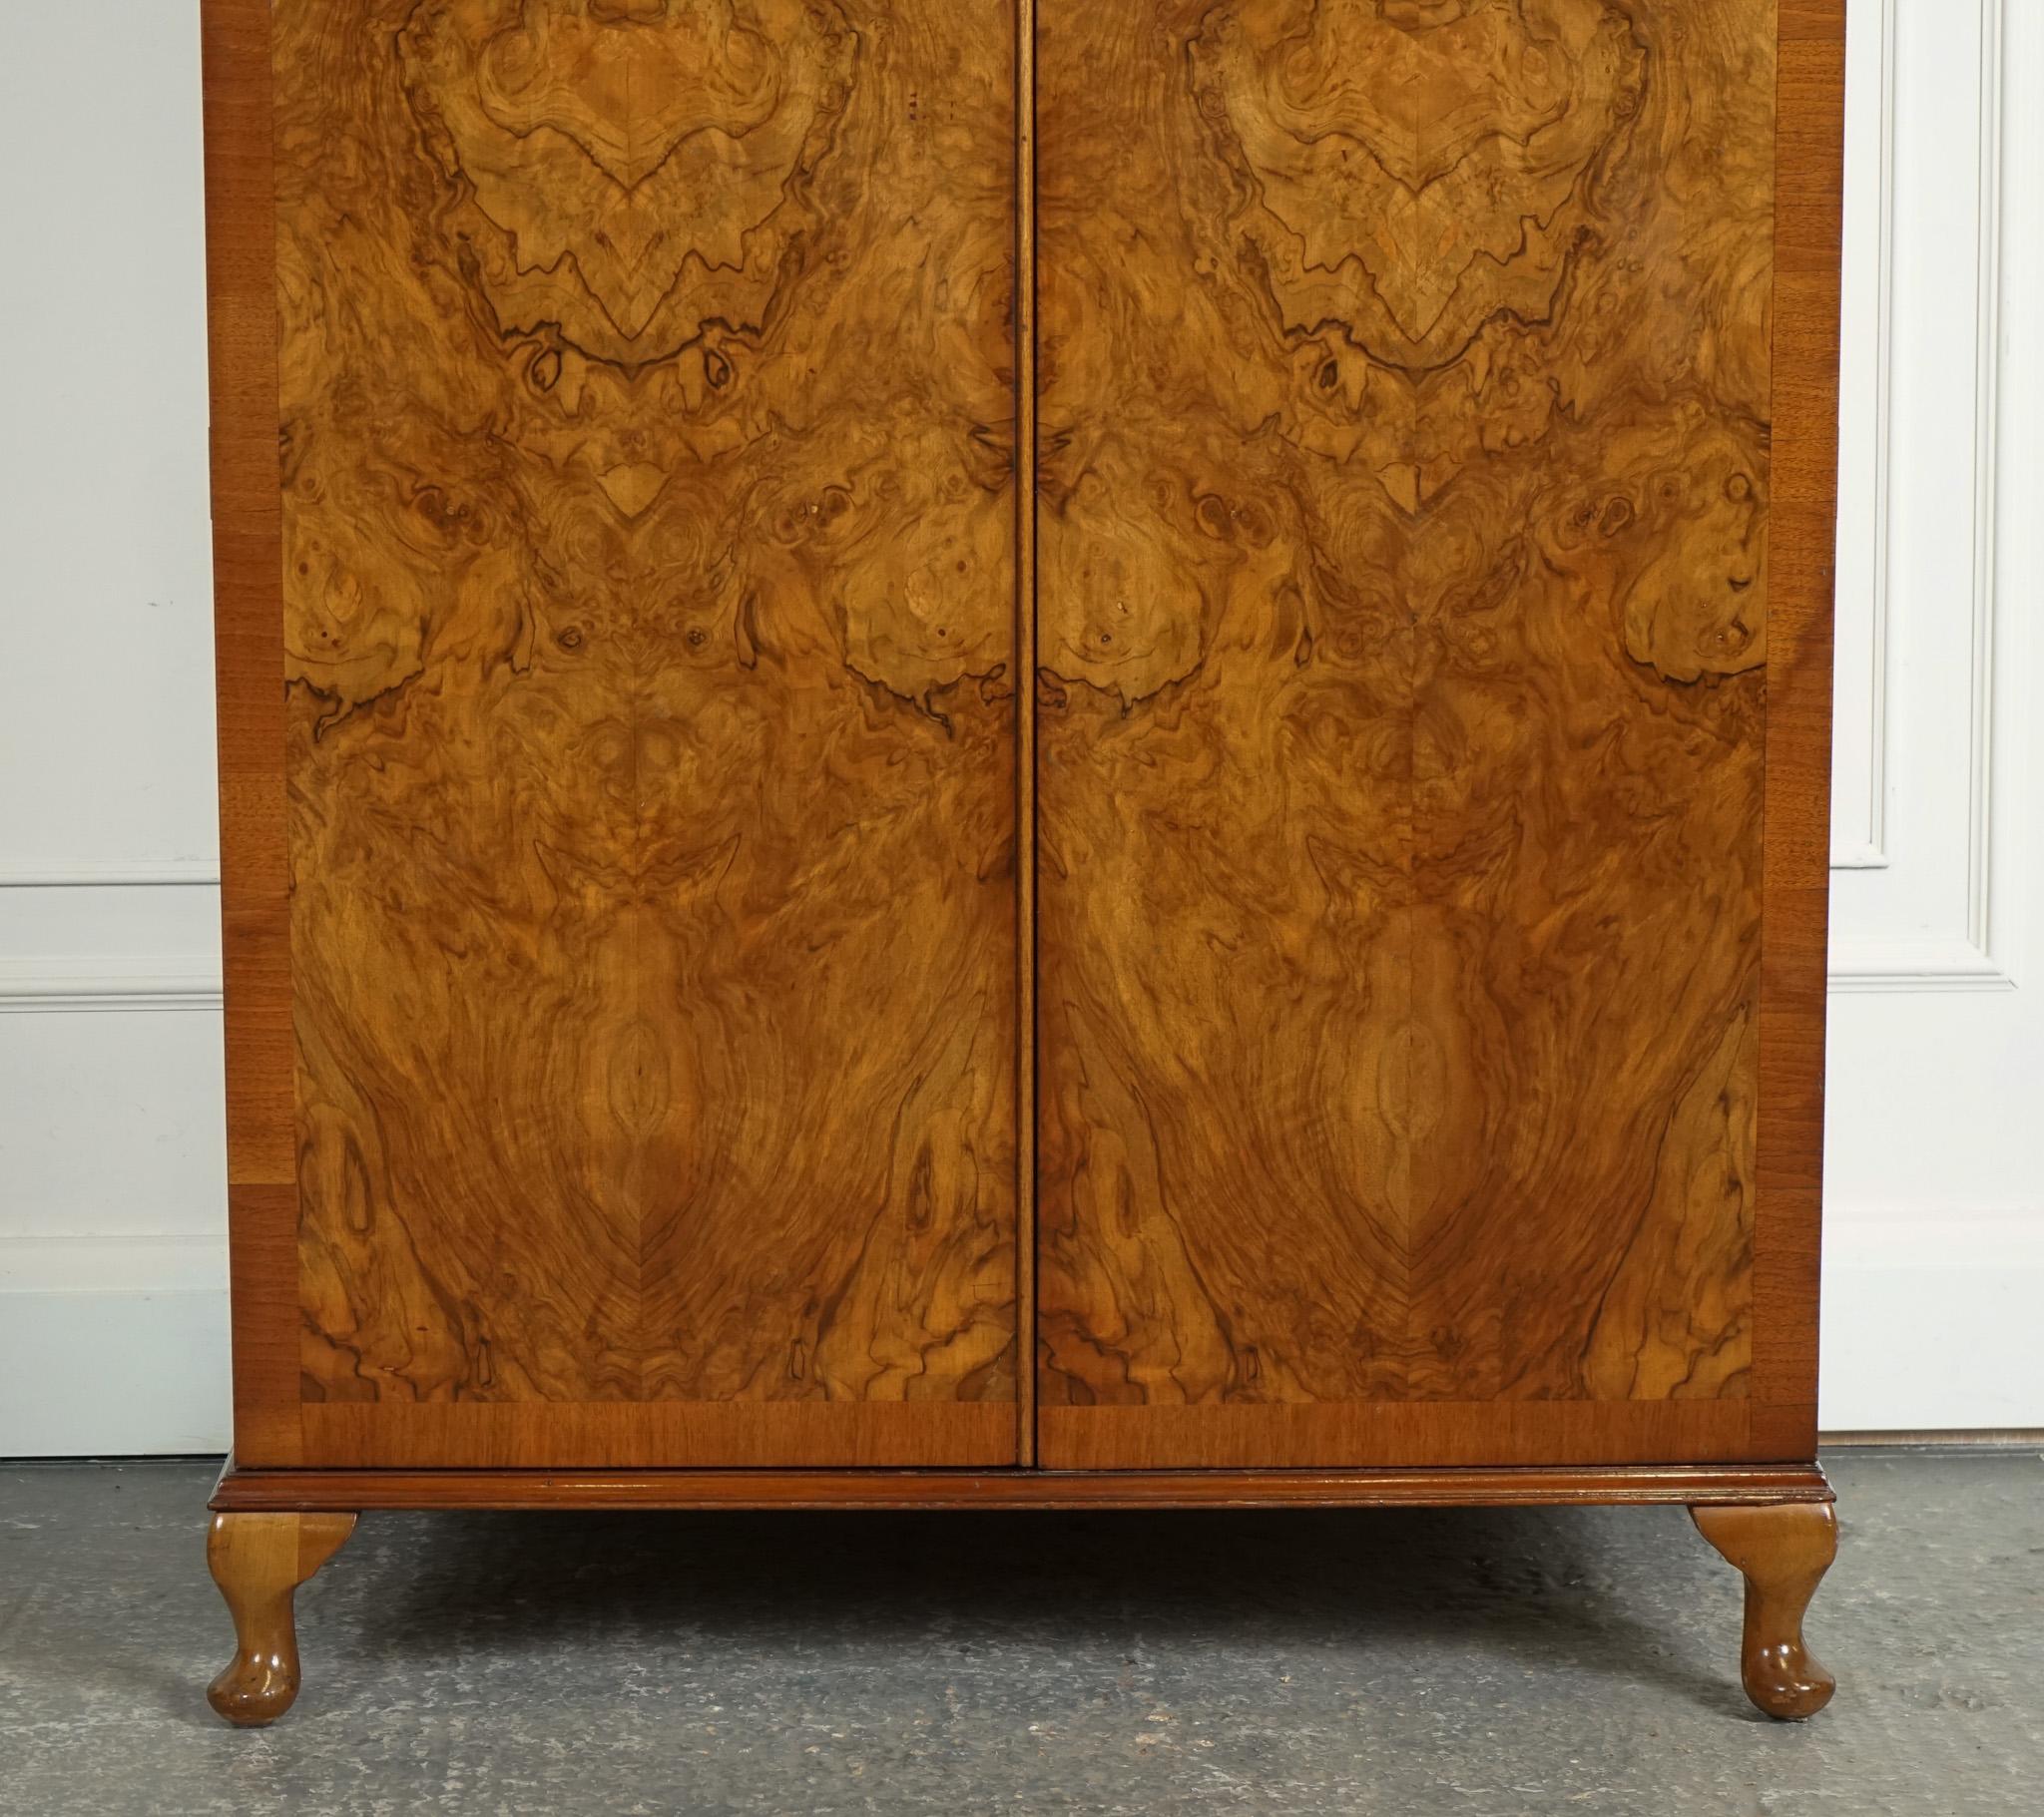 VINTAGE PETITE ART DECO 1940s BURR WALNUT WARDROBE MADE BY HEIRLOOM In Good Condition For Sale In Pulborough, GB